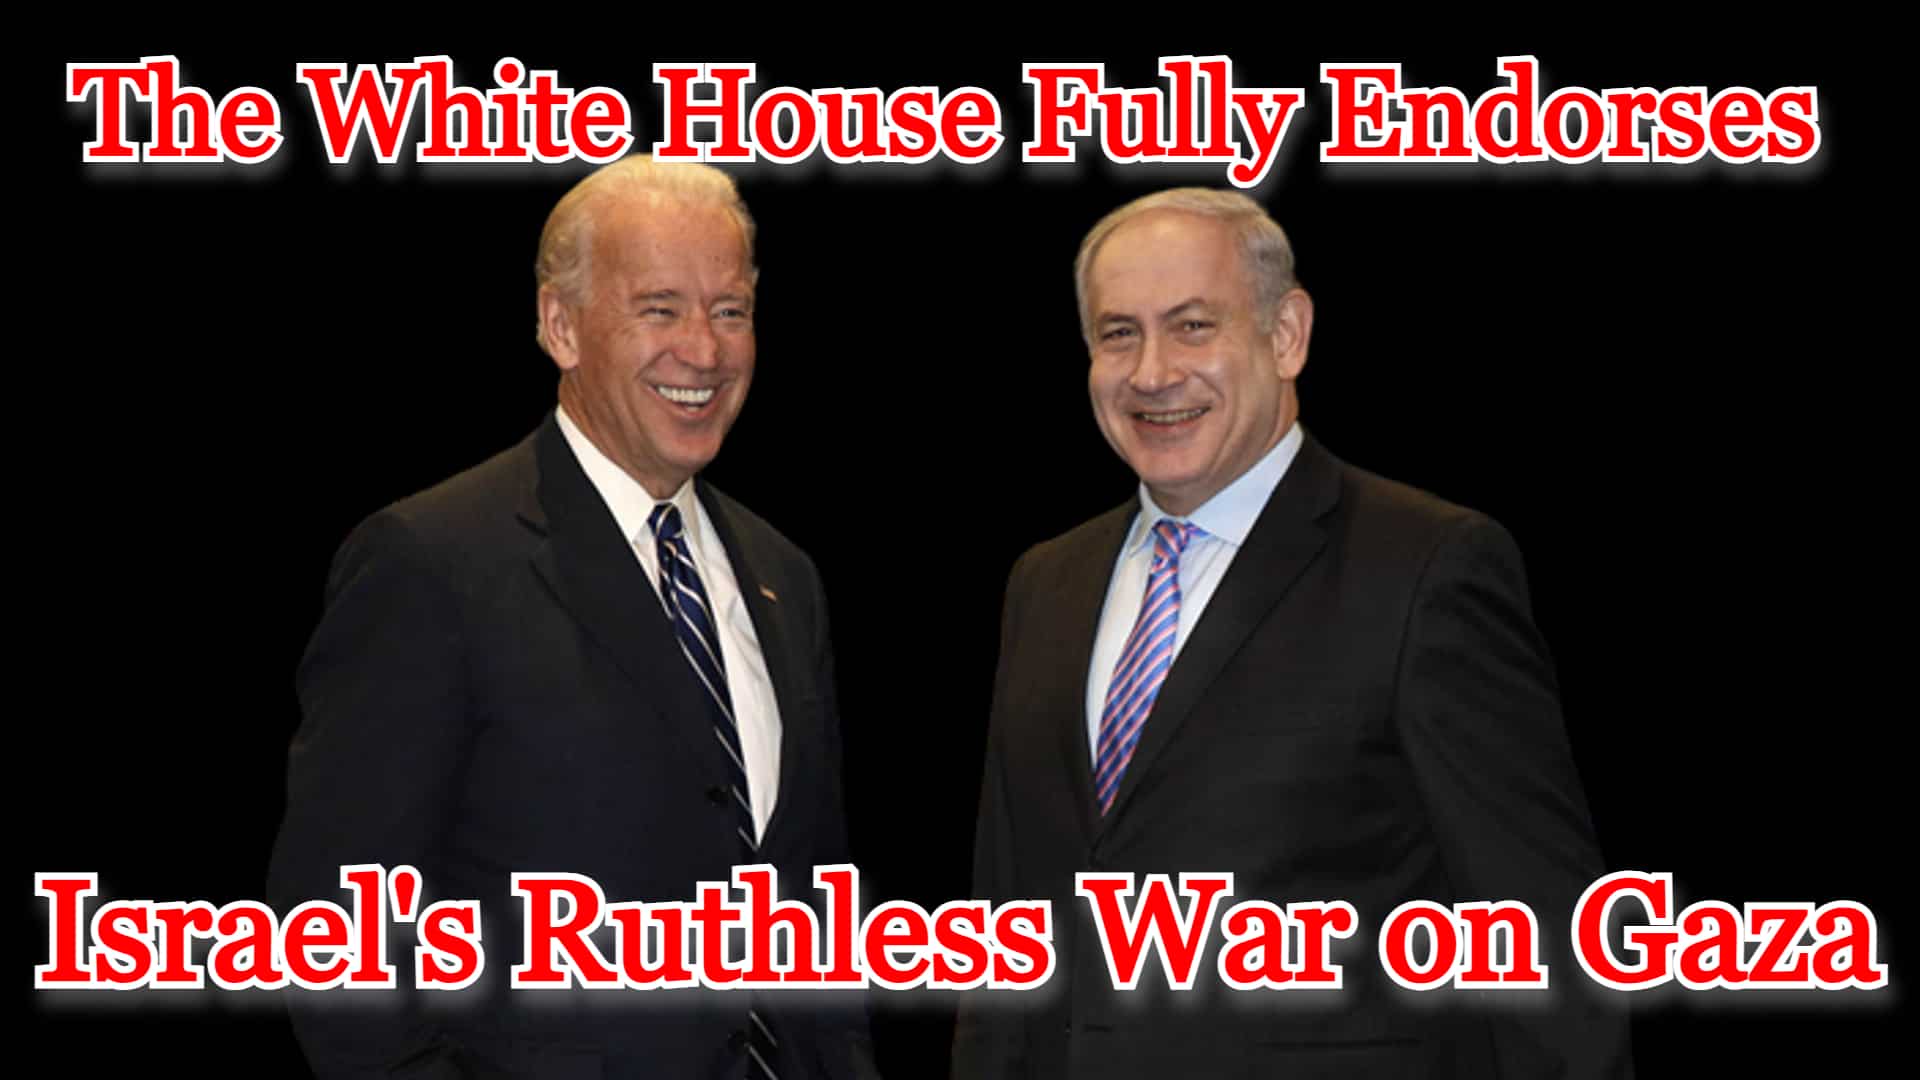 COI #485: The White House Fully Endorses Israel’s Ruthless War on Gaza